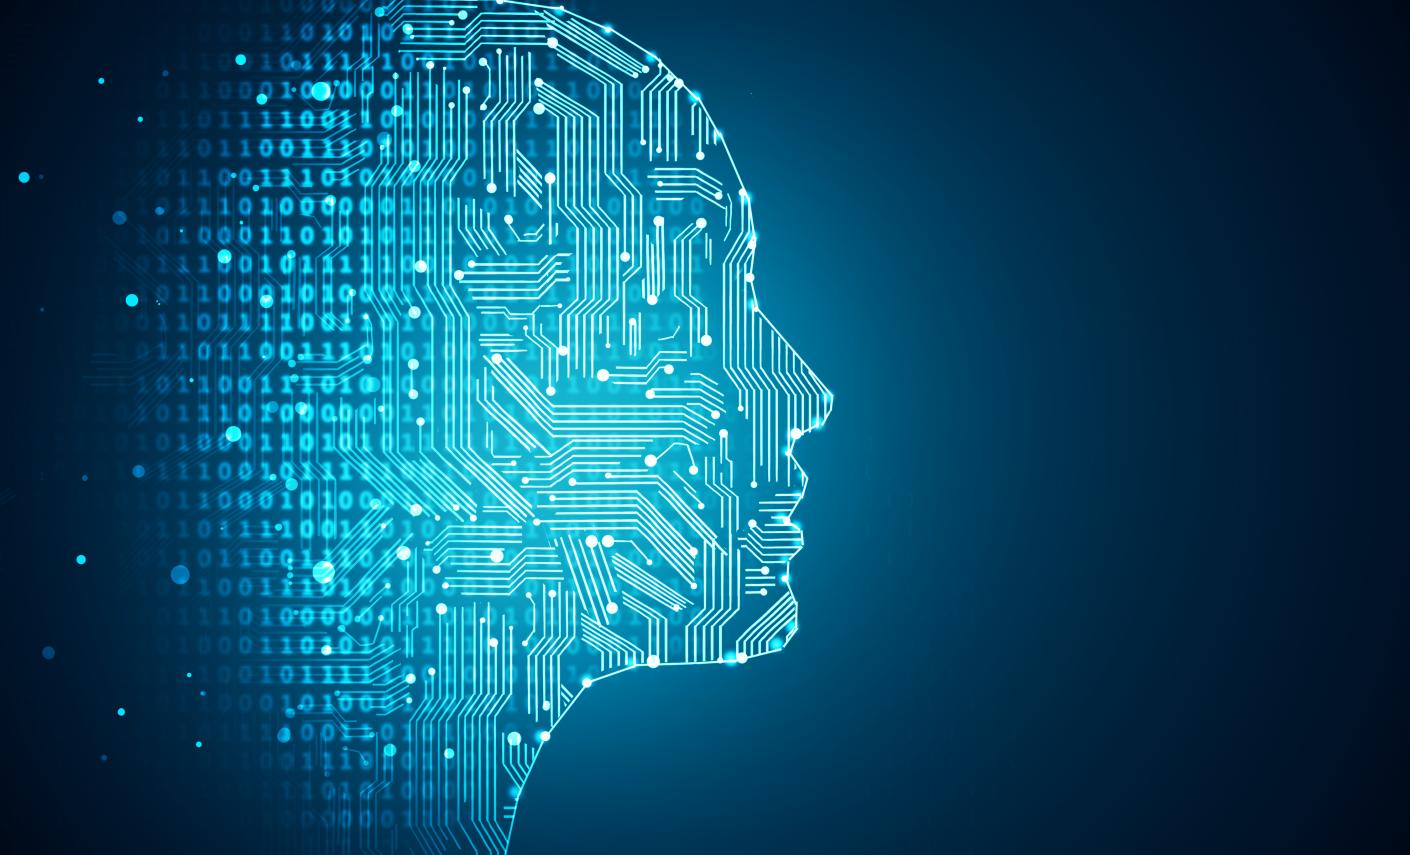 Artificial intelligence. Human head outline with circuit board inside. Technology and engineering concept. 3D Rendering. Source: istockphoto.com. Credit: Peshkova